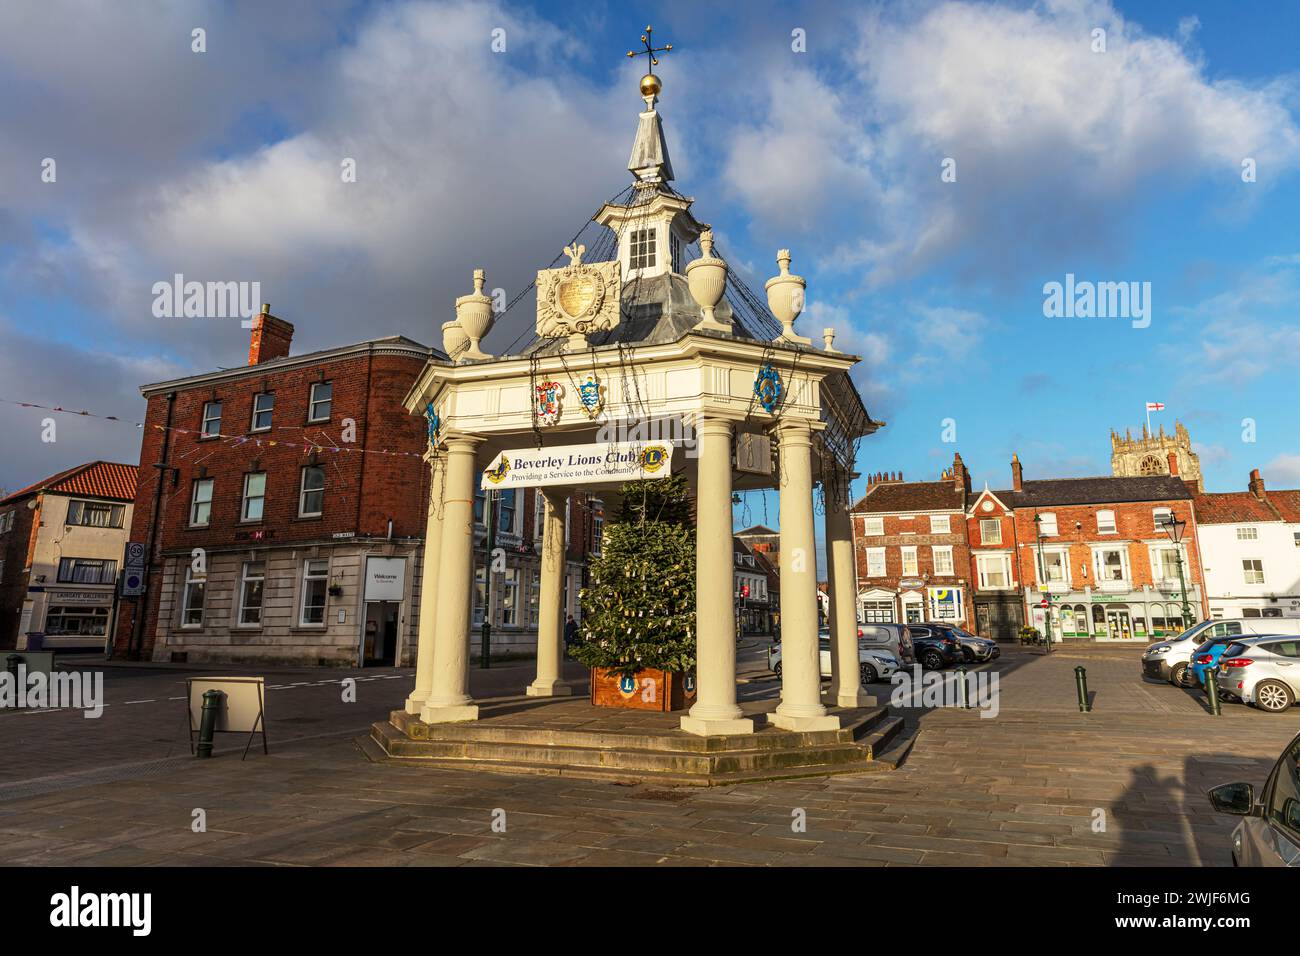 Beverley Bandstand, Beverley, Yorkshire, Royaume-Uni, Angleterre, Beverley UK, Beverley Yorkshire, Beverley Town, Town, villes, villes du Yorkshire, Banque D'Images